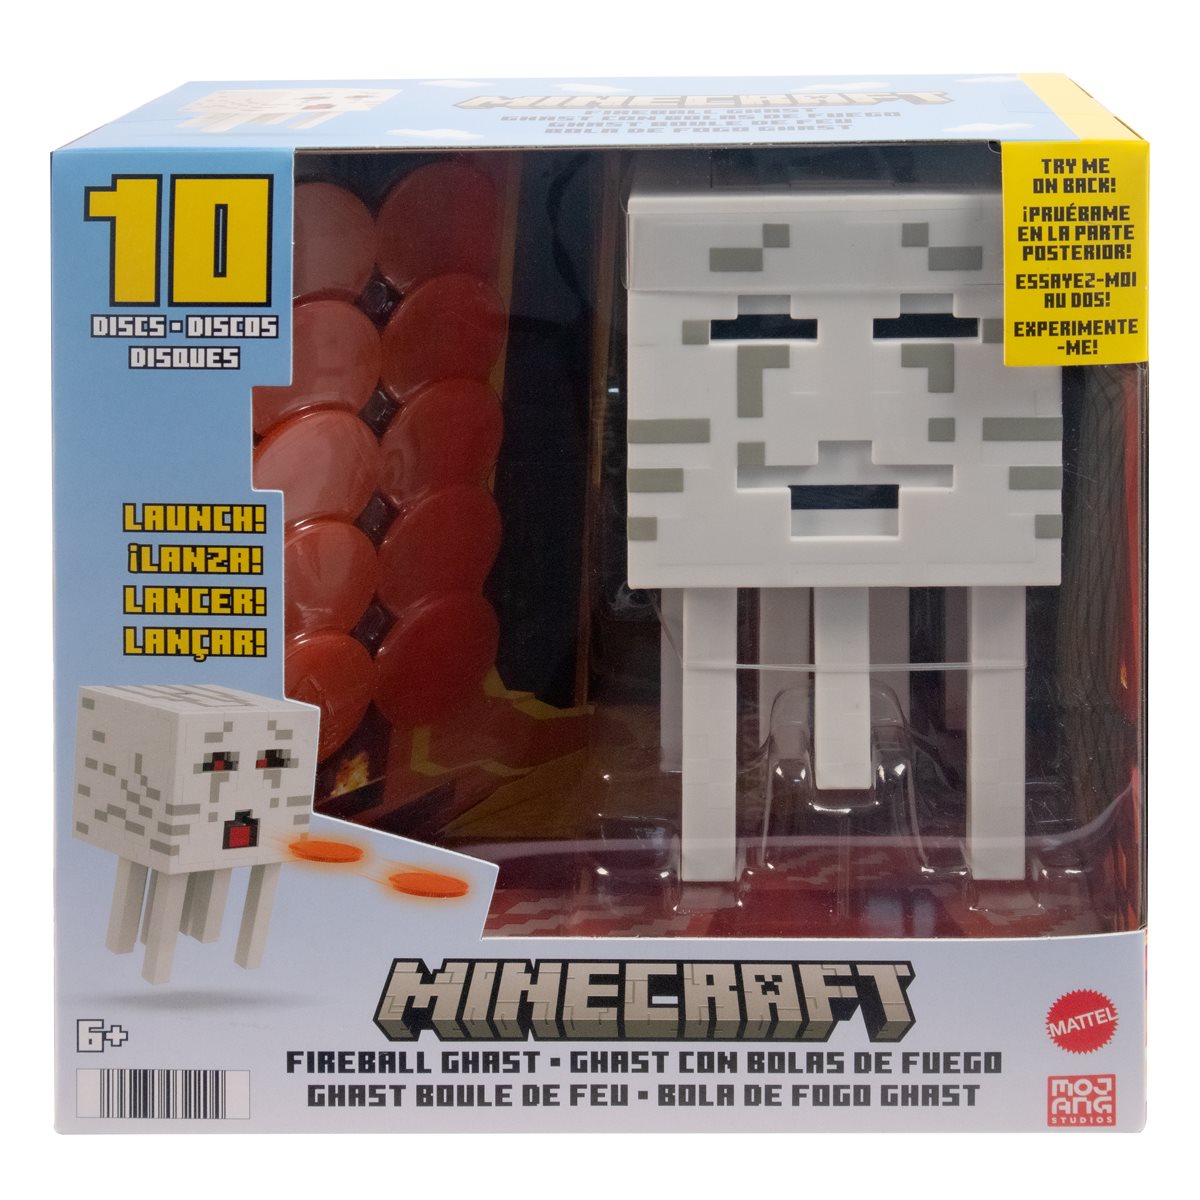 FireballFilms — I decided to post this pic of these 2 Minecraft